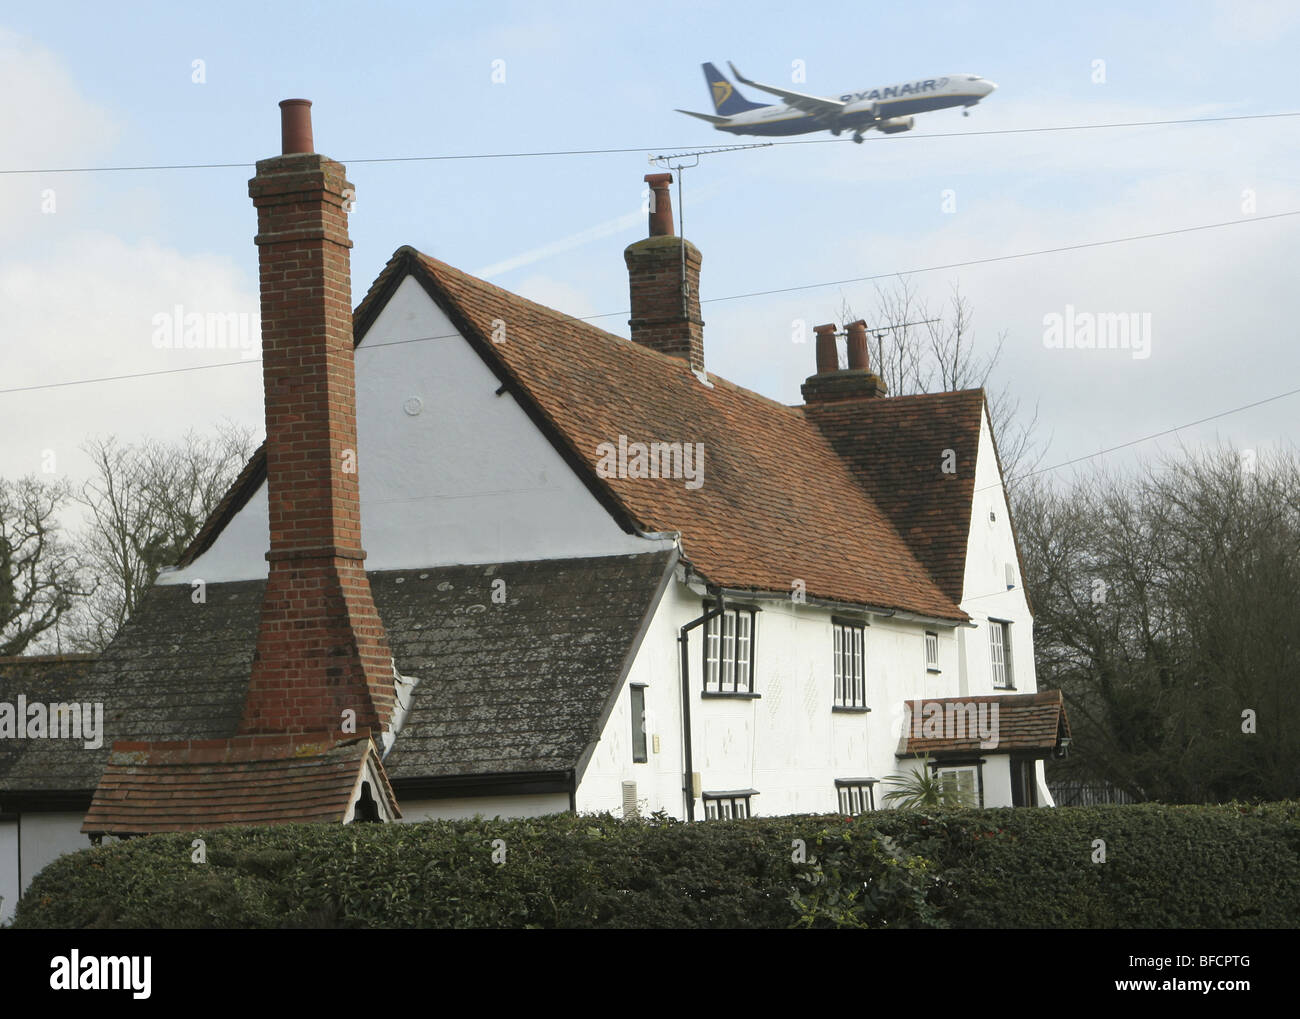 Plane flying over house on approach to Stansted Airport, Essex, UK Stock Photo